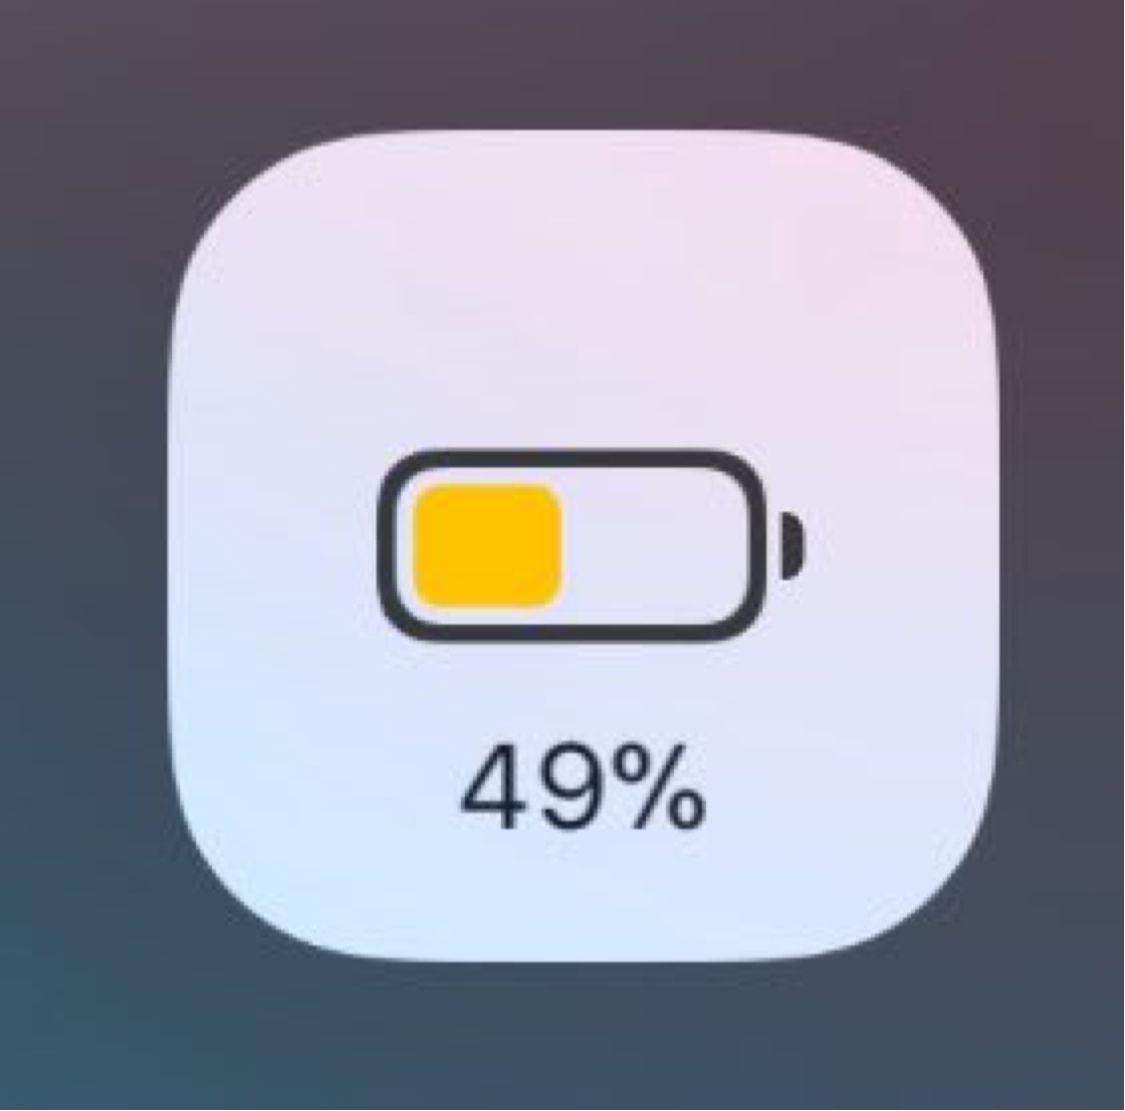 This tweak puts a live battery indicator in Control Center's Low